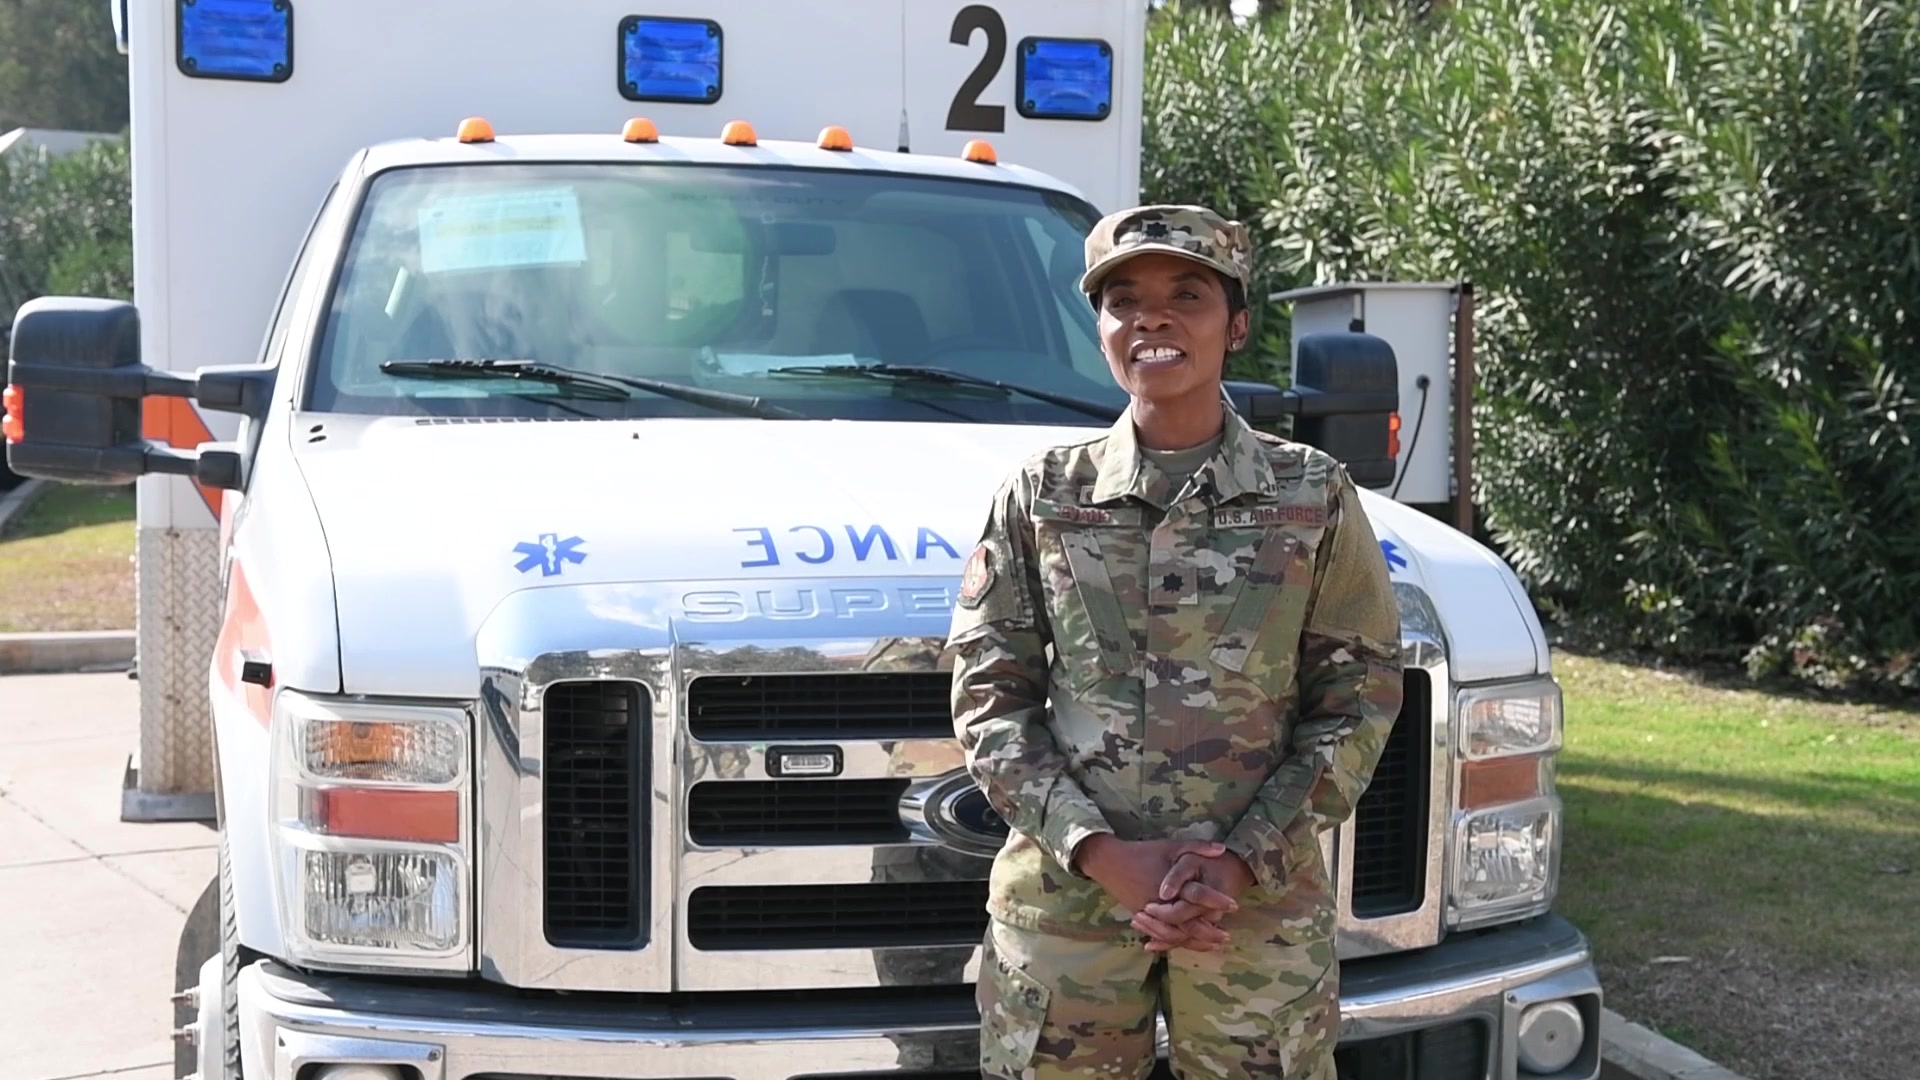 The 39th Medical Operations Squadron showcases how they maintain the mission everyday.